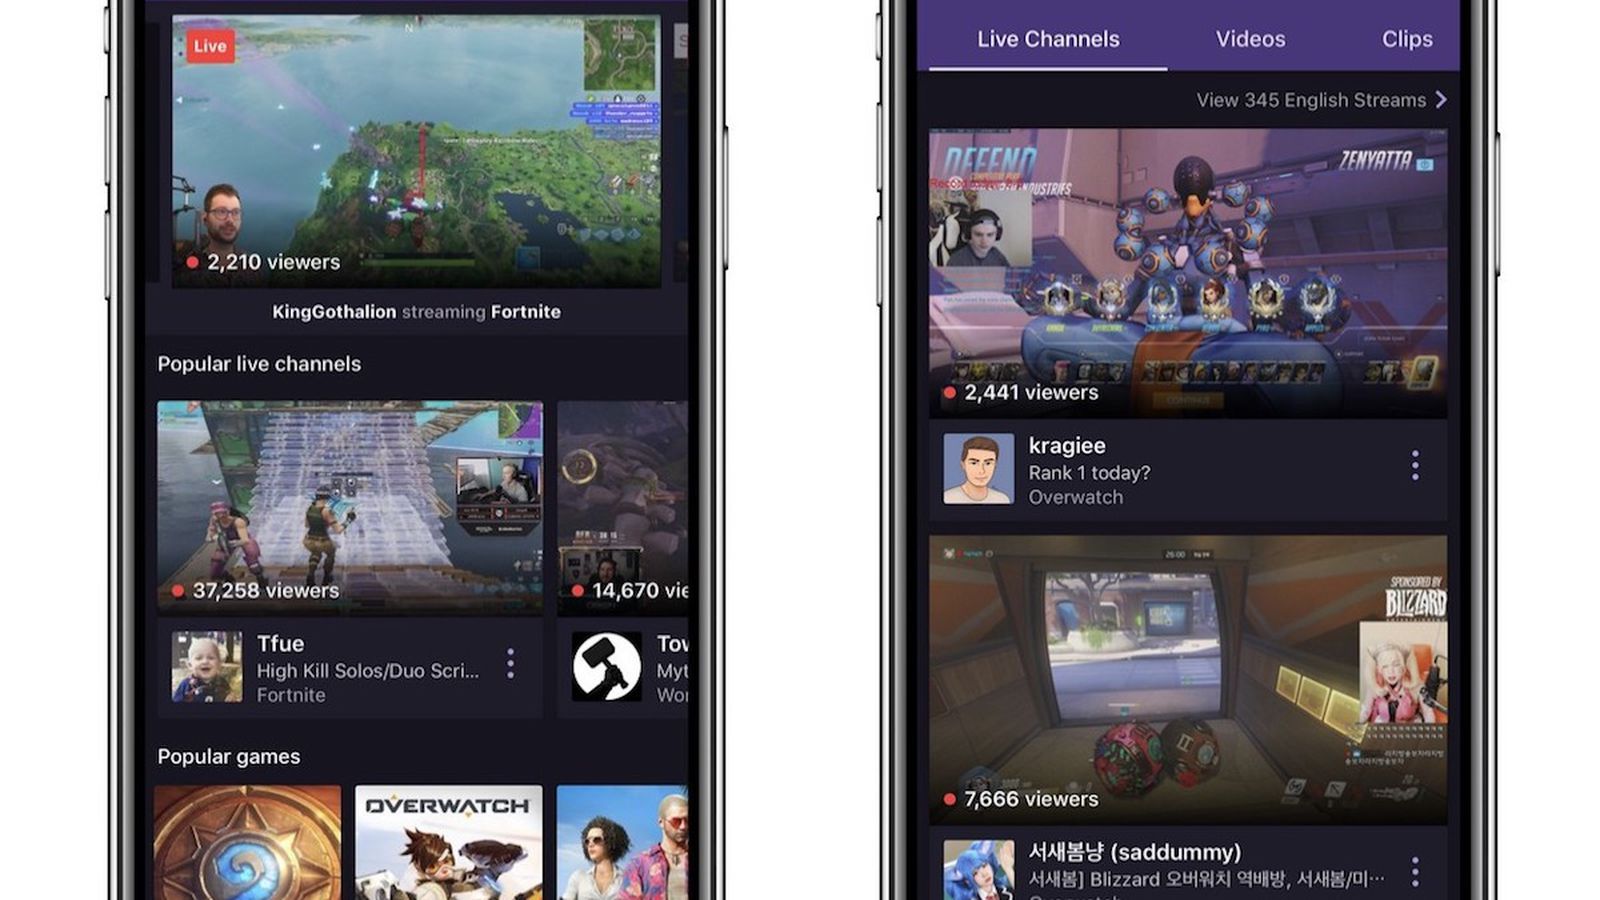 Twitch for iOS adds support for subscribing to streamers, but with an added  cost - 9to5Mac